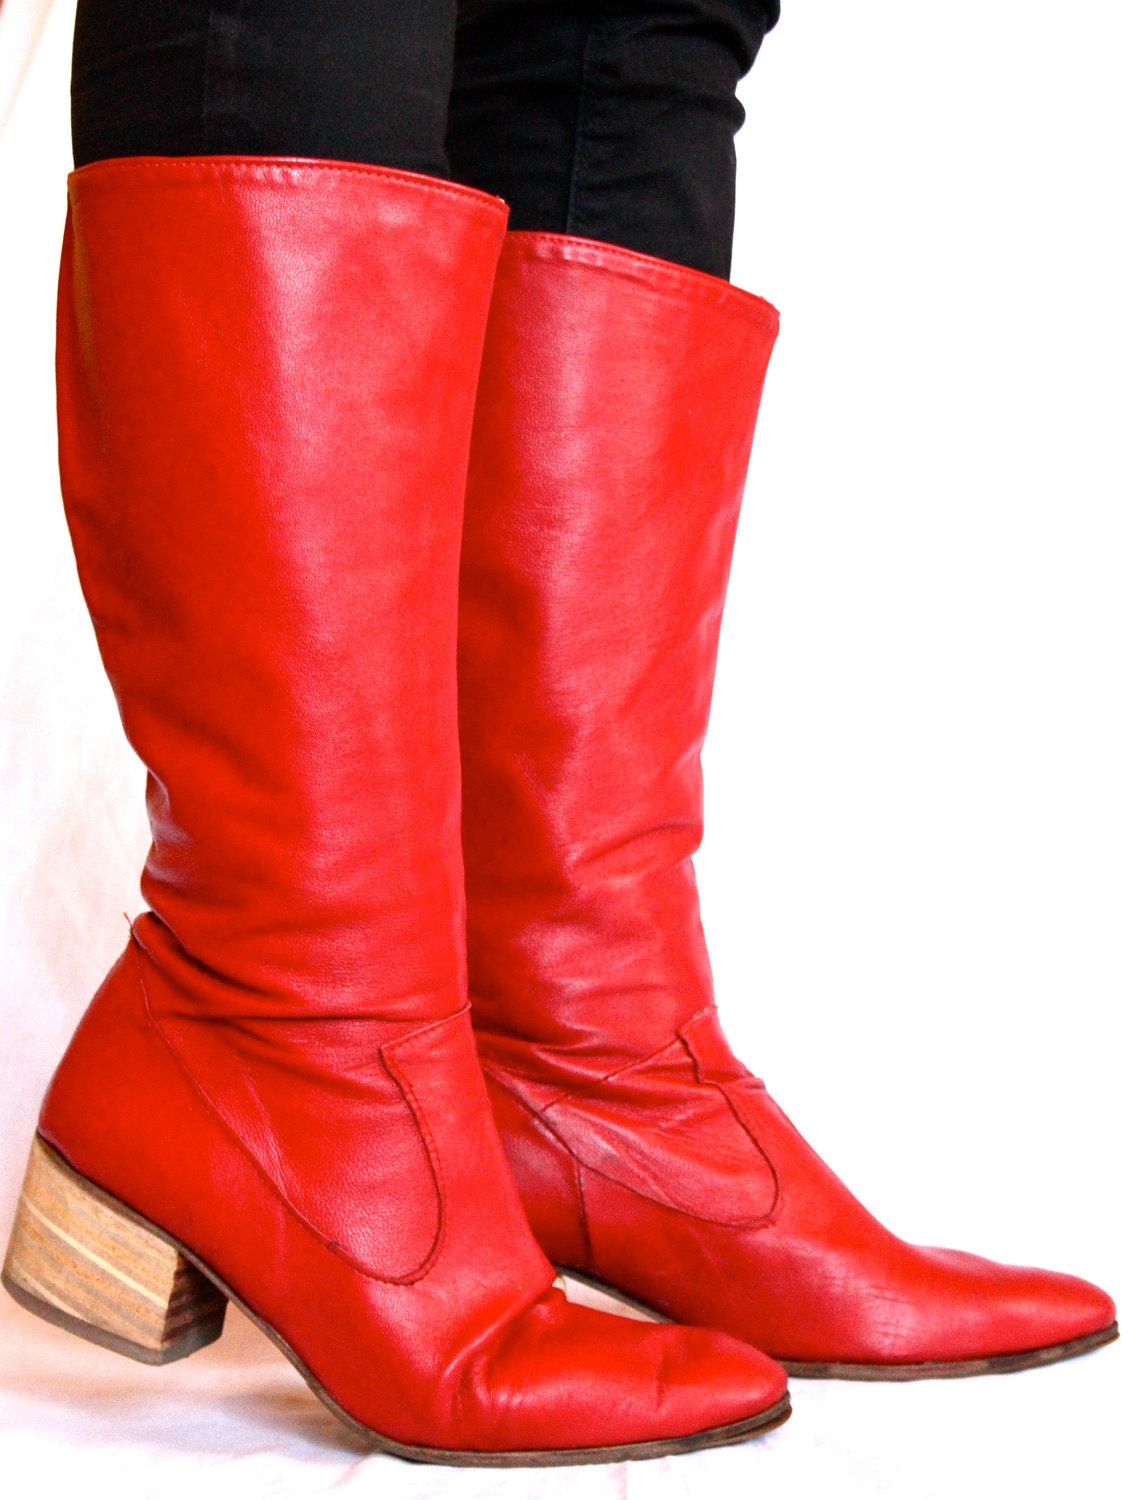 Red Leather Handmade Boots